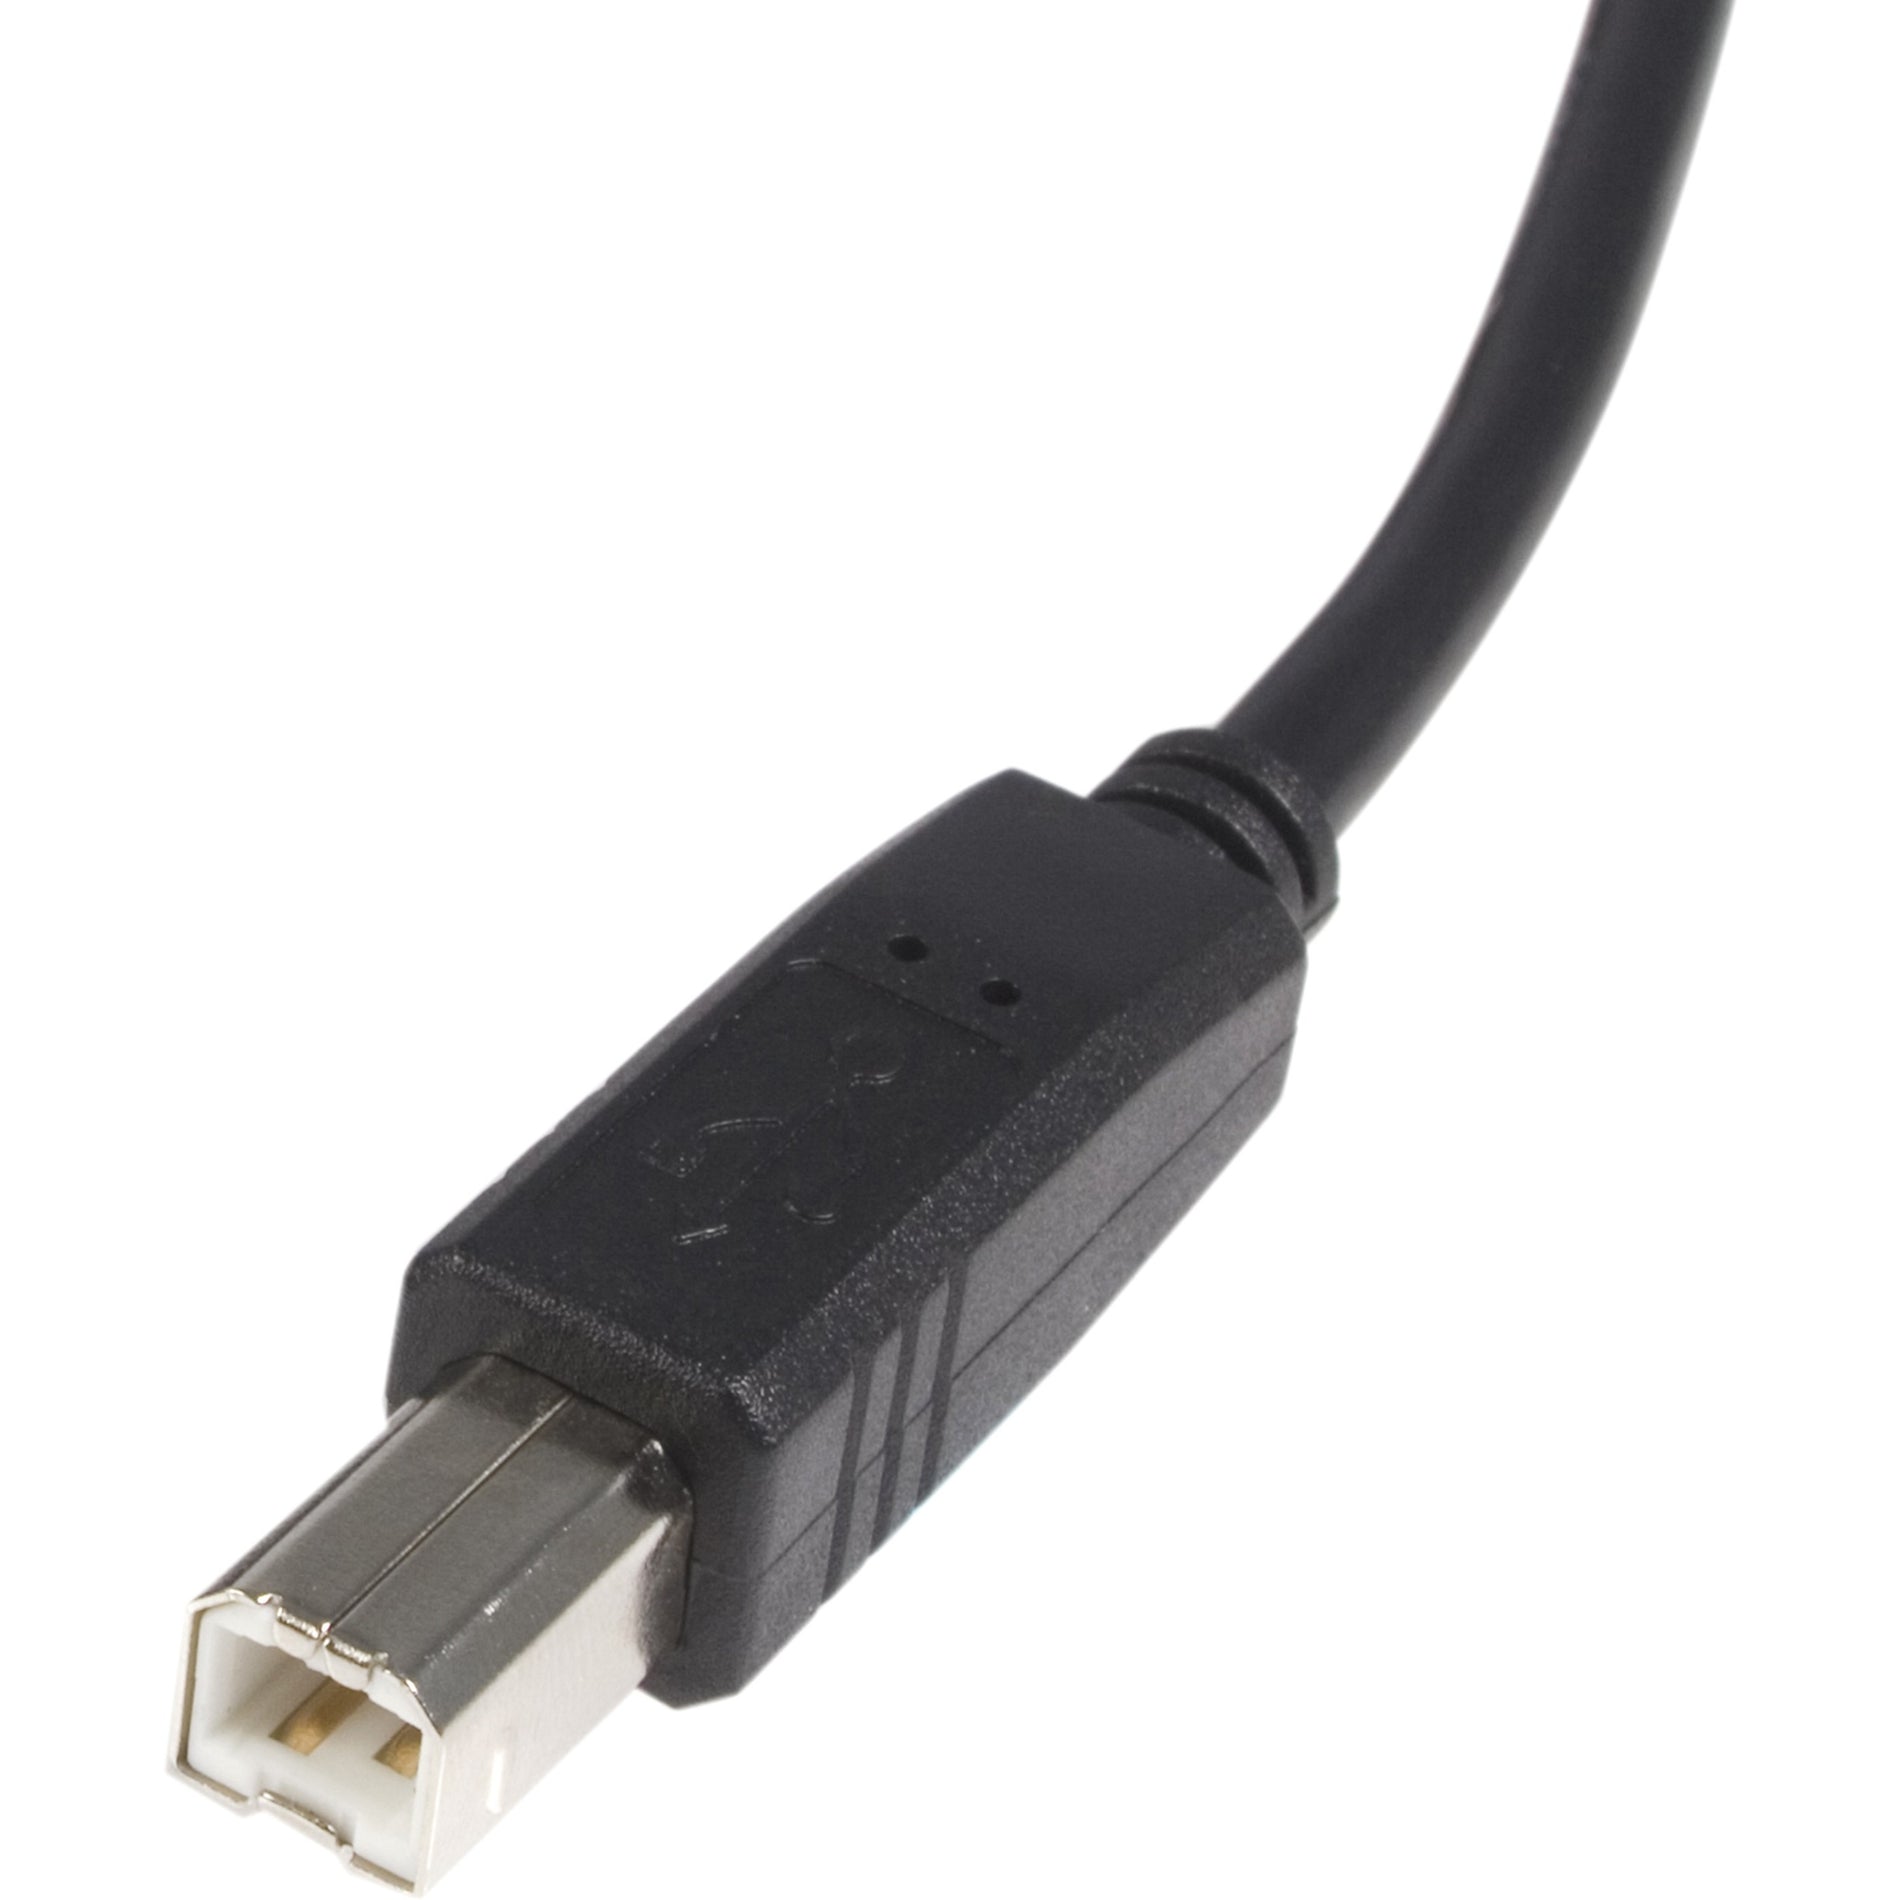 StarTech.com USB2HAB10 High Speed Certified USB 2.0 USB Cable, 10 ft Data Transfer Cable